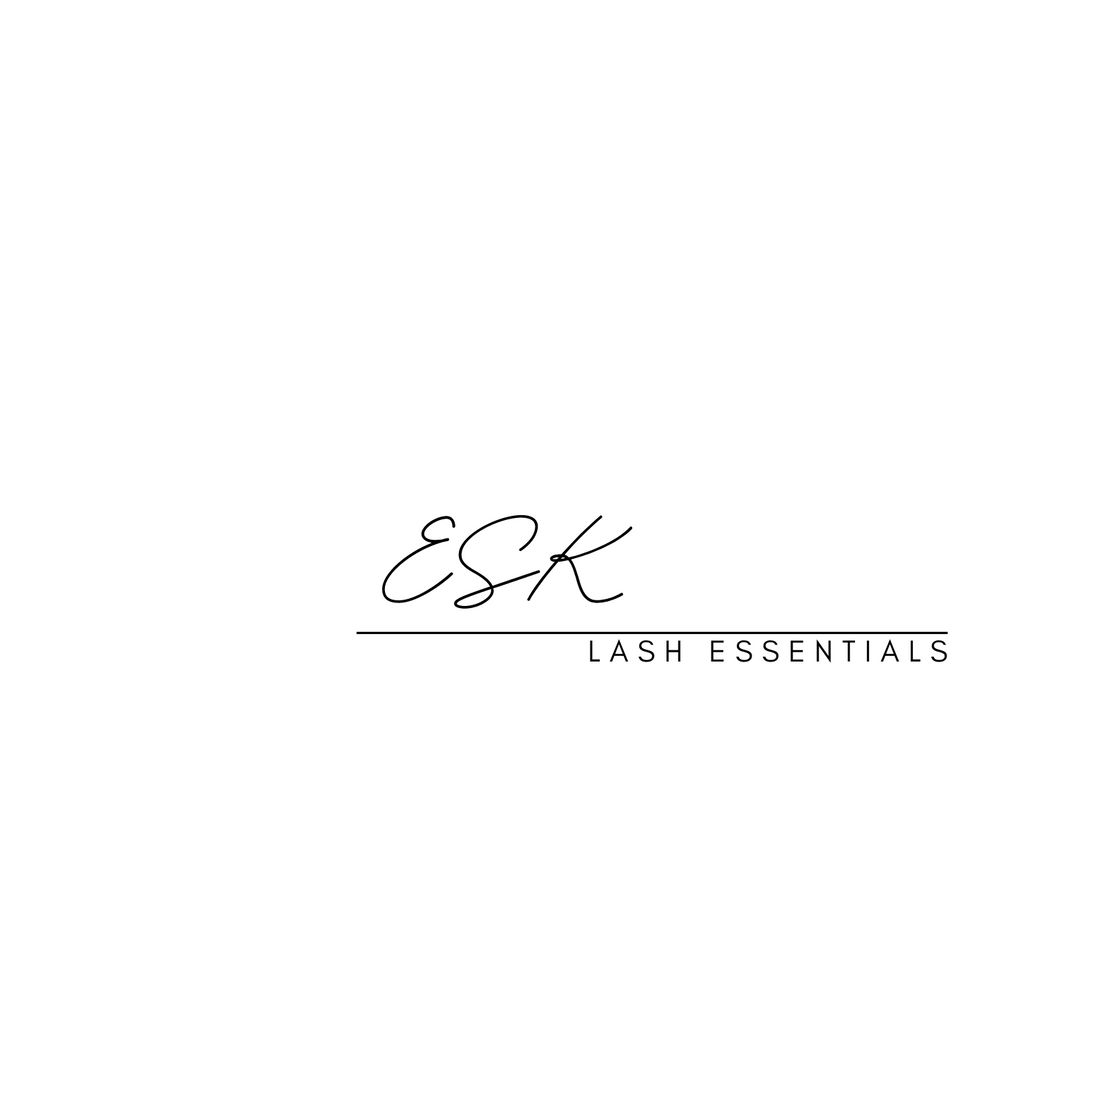 9 Must-Have ESK Lash Extension Essentials | ESK eyelash extension products and supplies